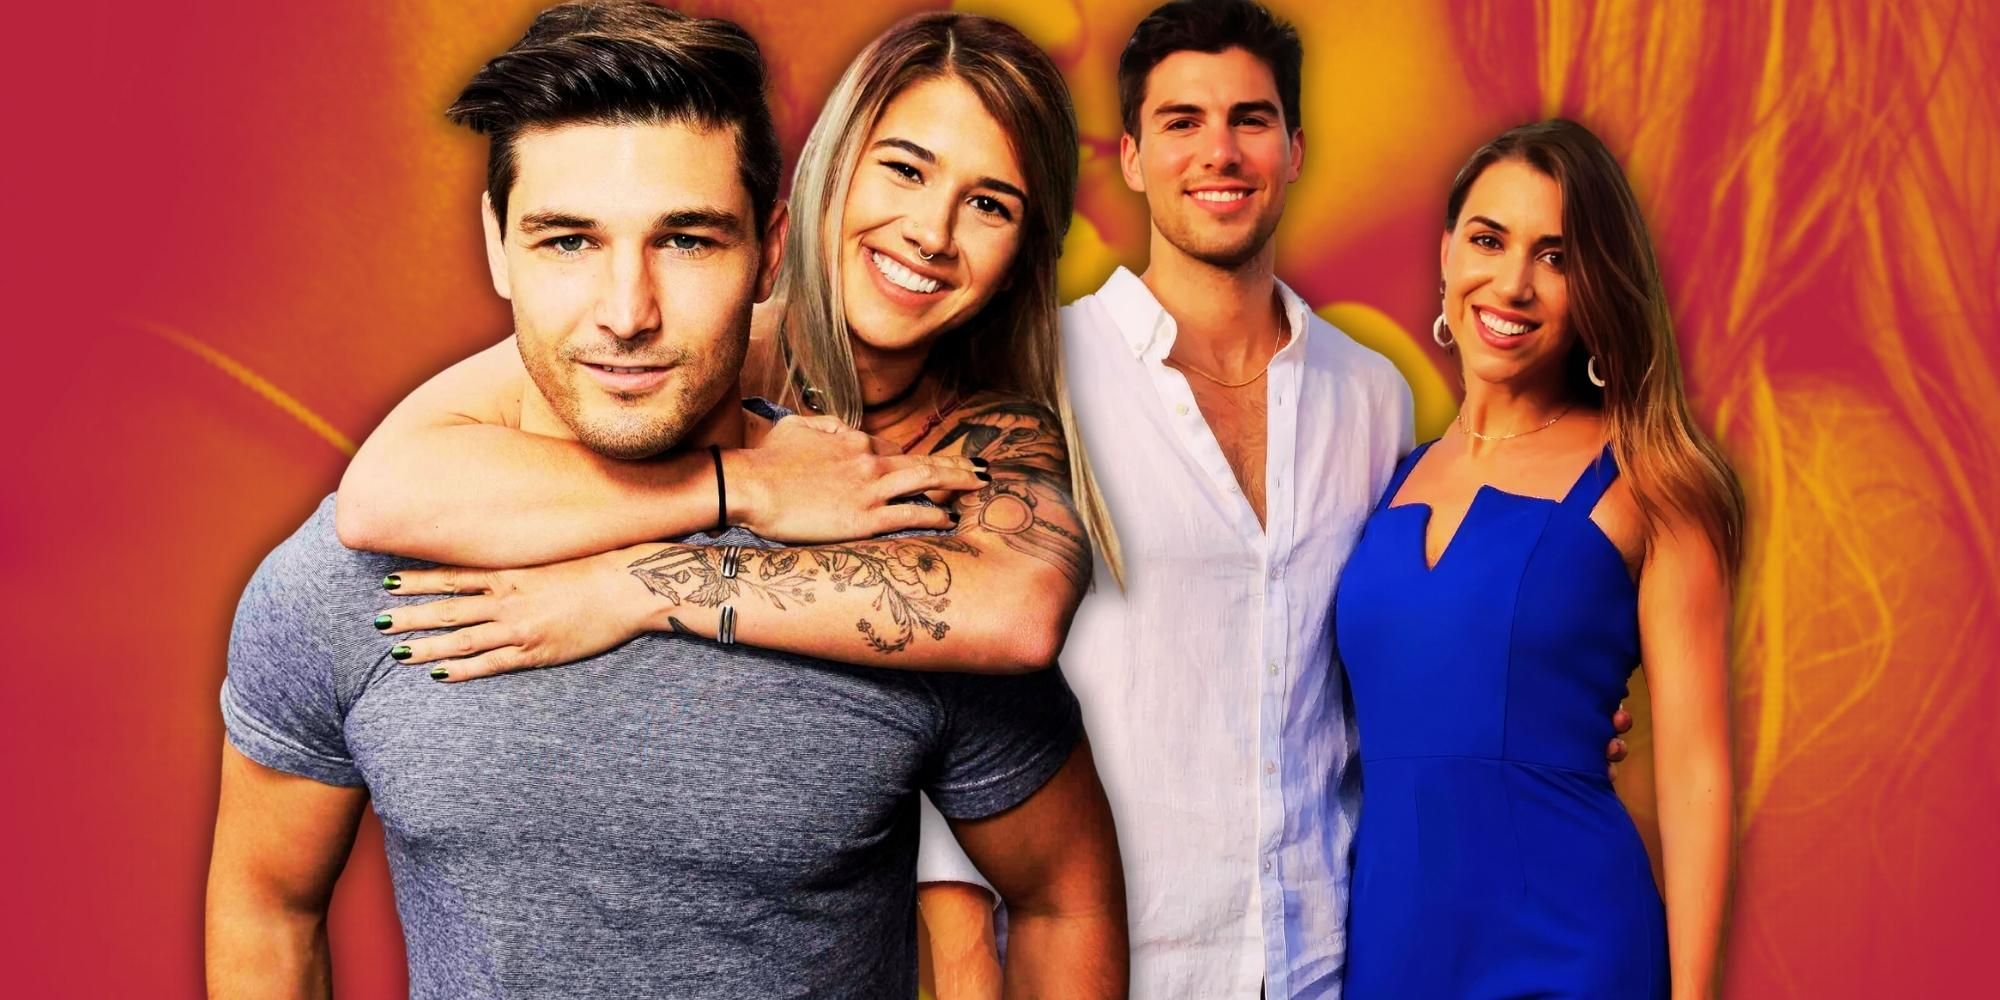 Are You The One Season 1 Couples: Where Are They Now?